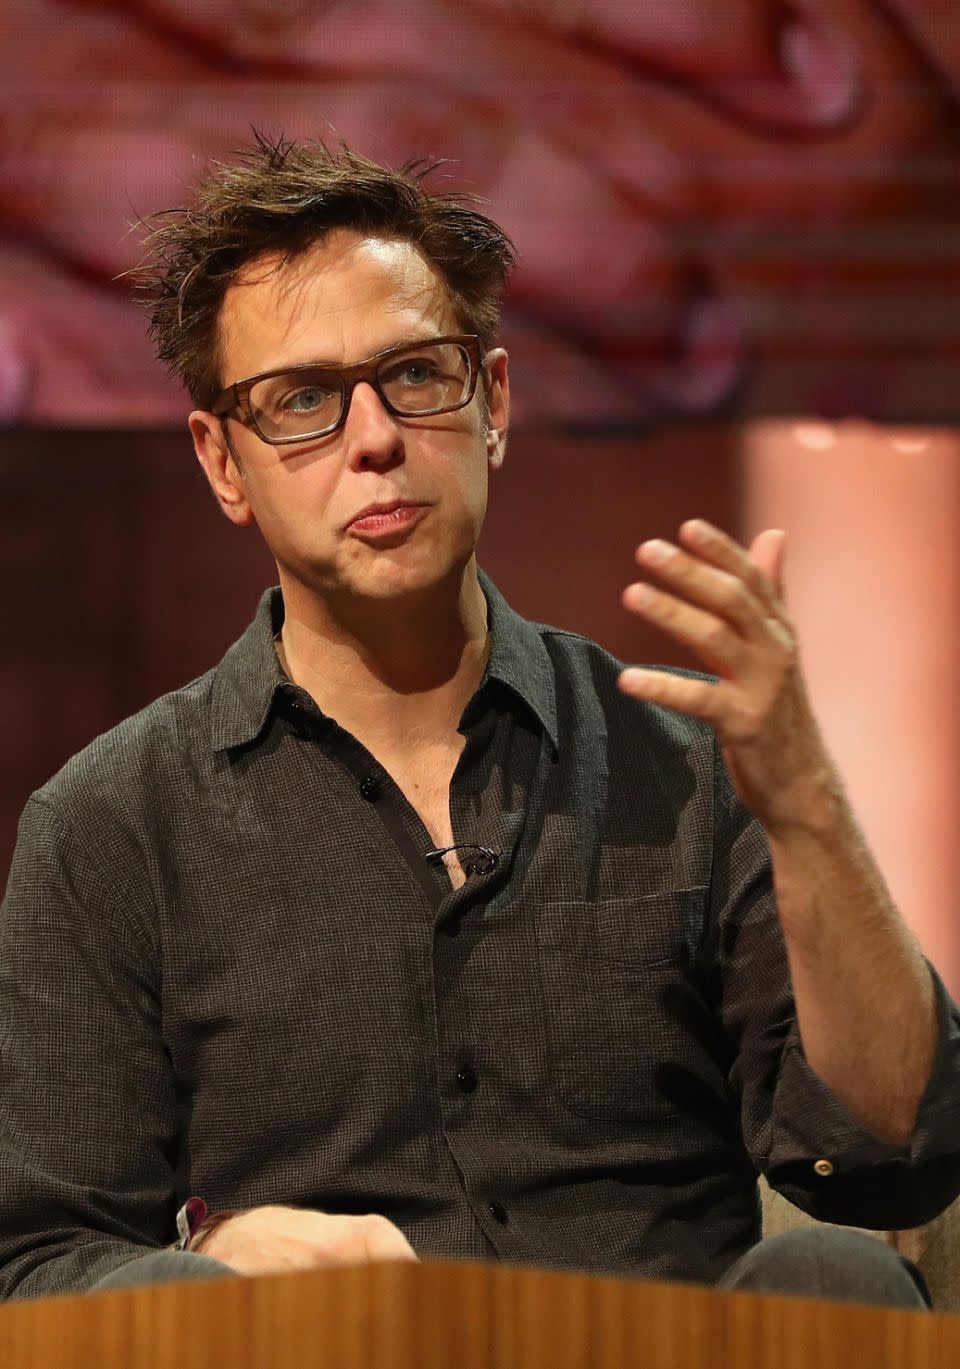 Guardians Of The Galaxy director James Gunn has since come out, taking aim at Toback in a Facebook post. Source: Getty